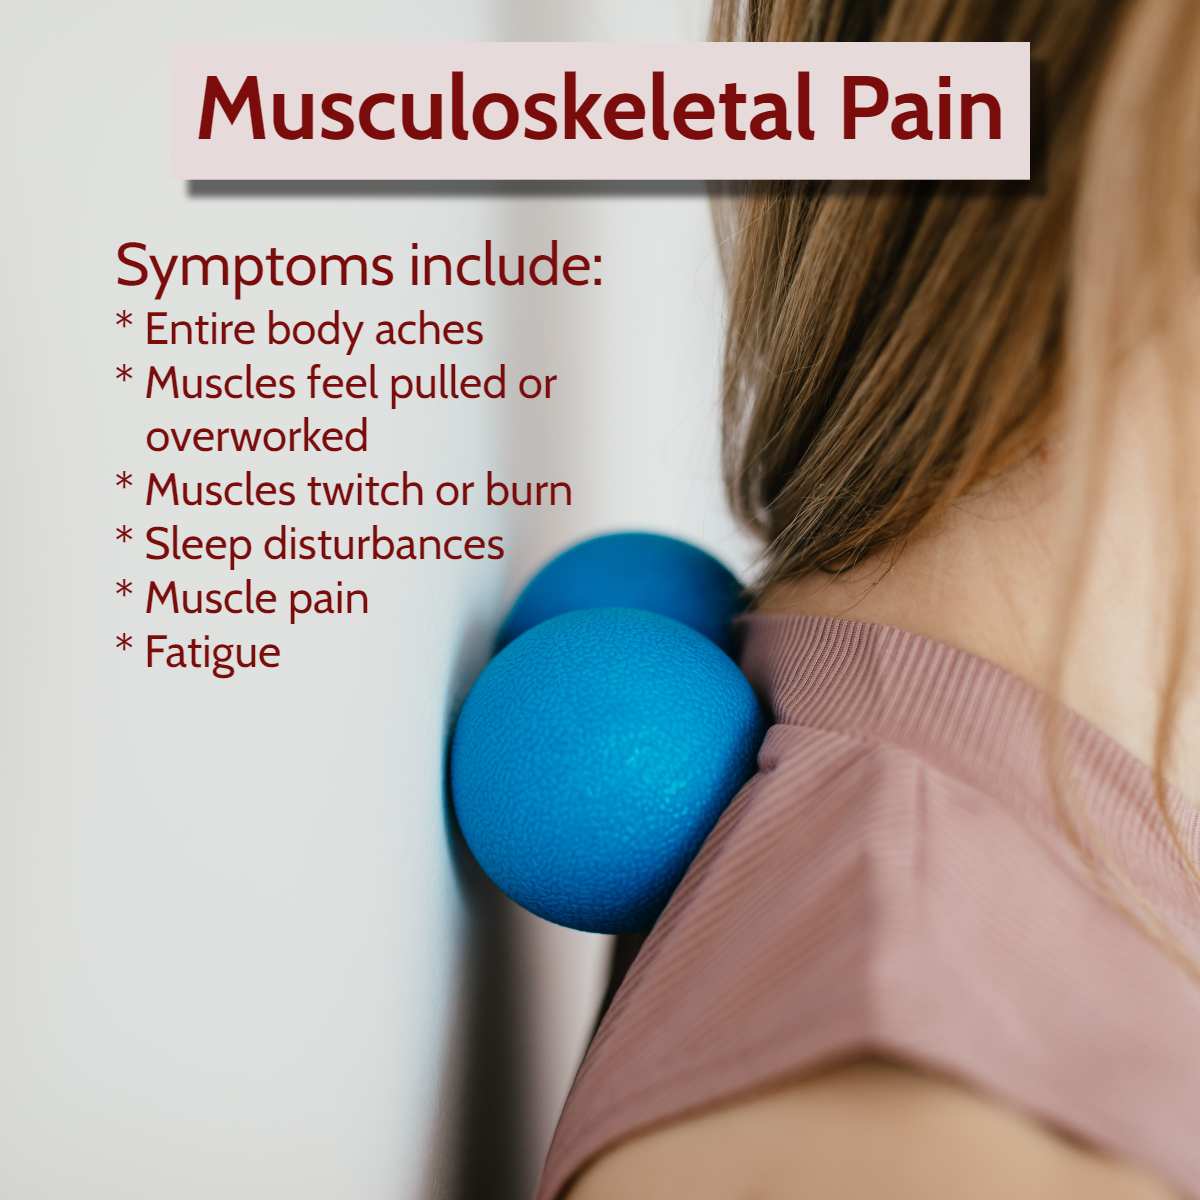 Causes of Musculoskeletal Pain